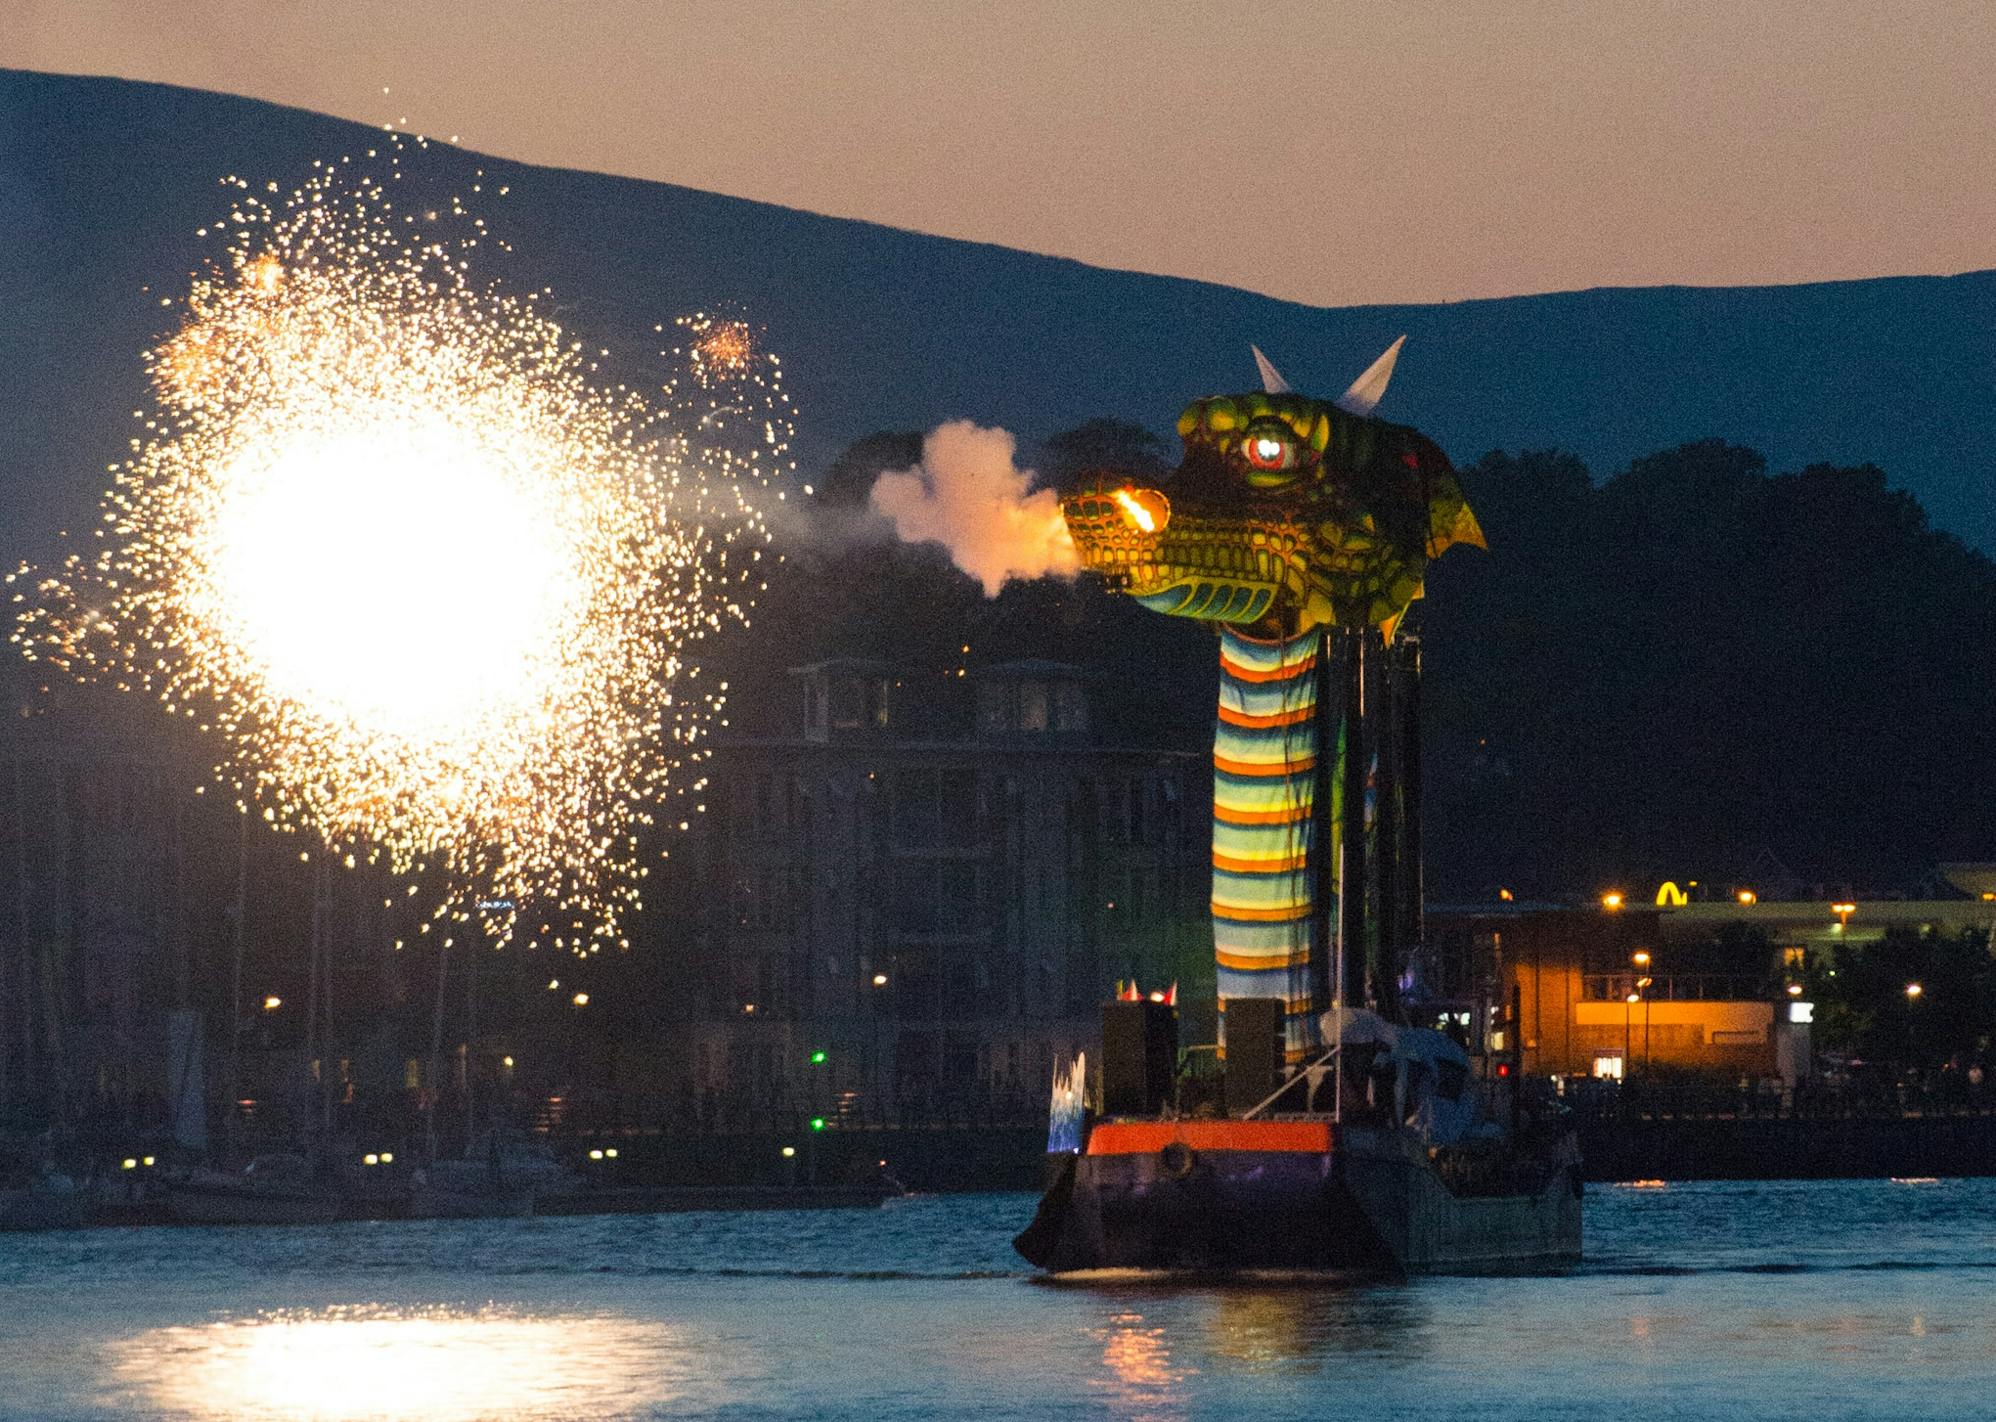 A large green dragon spitting sparks as it travels on the water